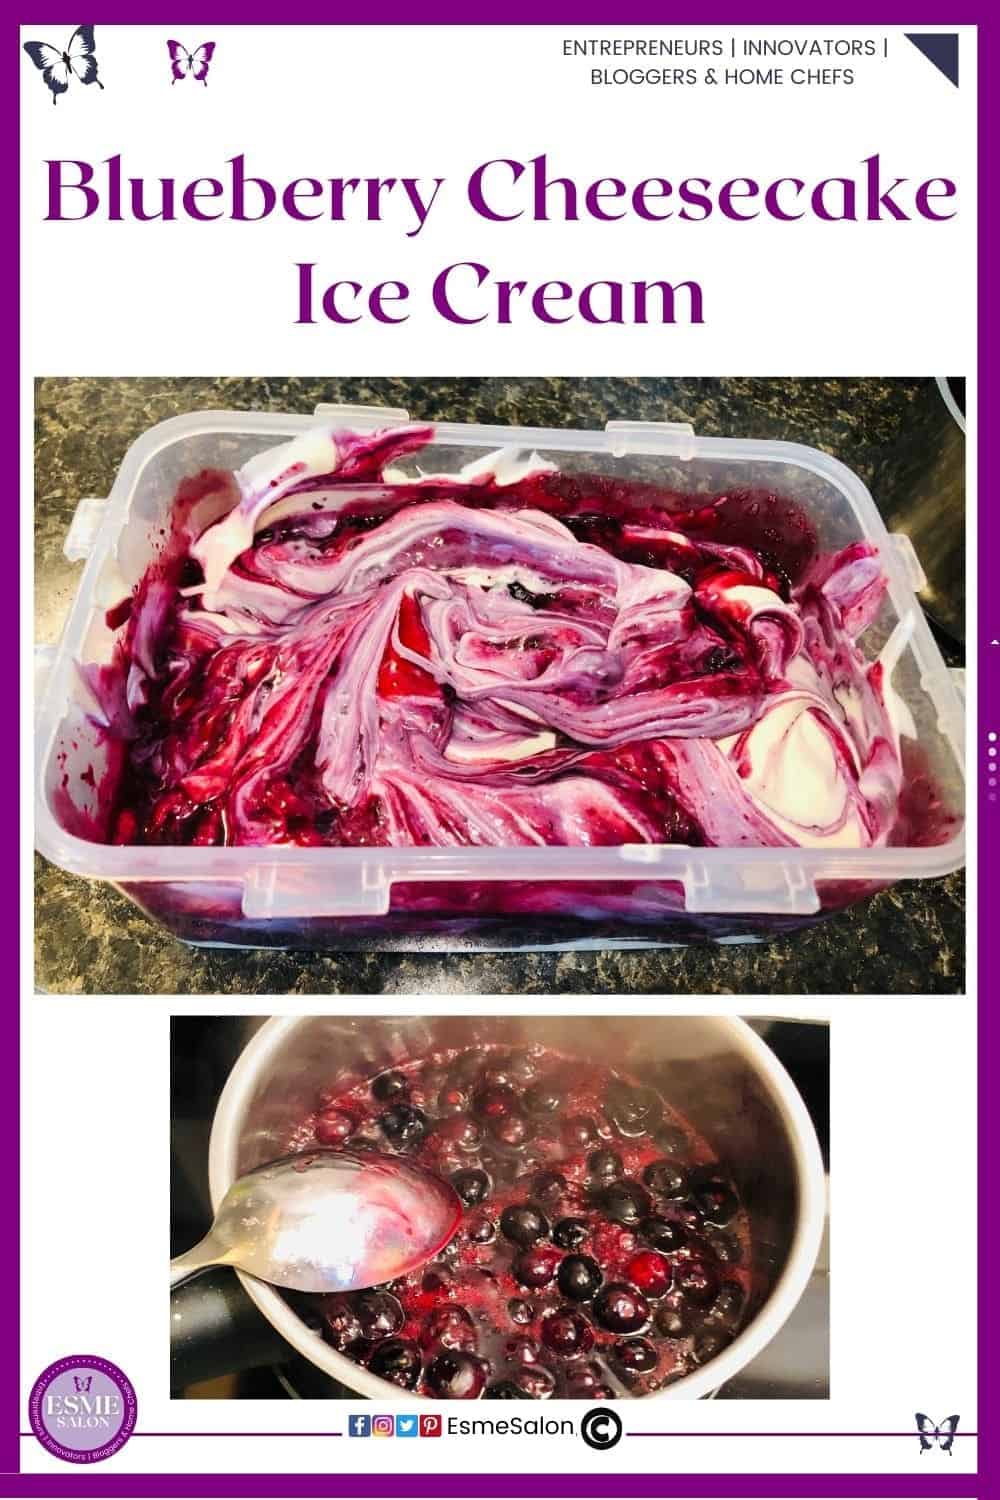 an image of Blueberry Cheesecake Ice Cream in a plastic container as well as blue berry compote